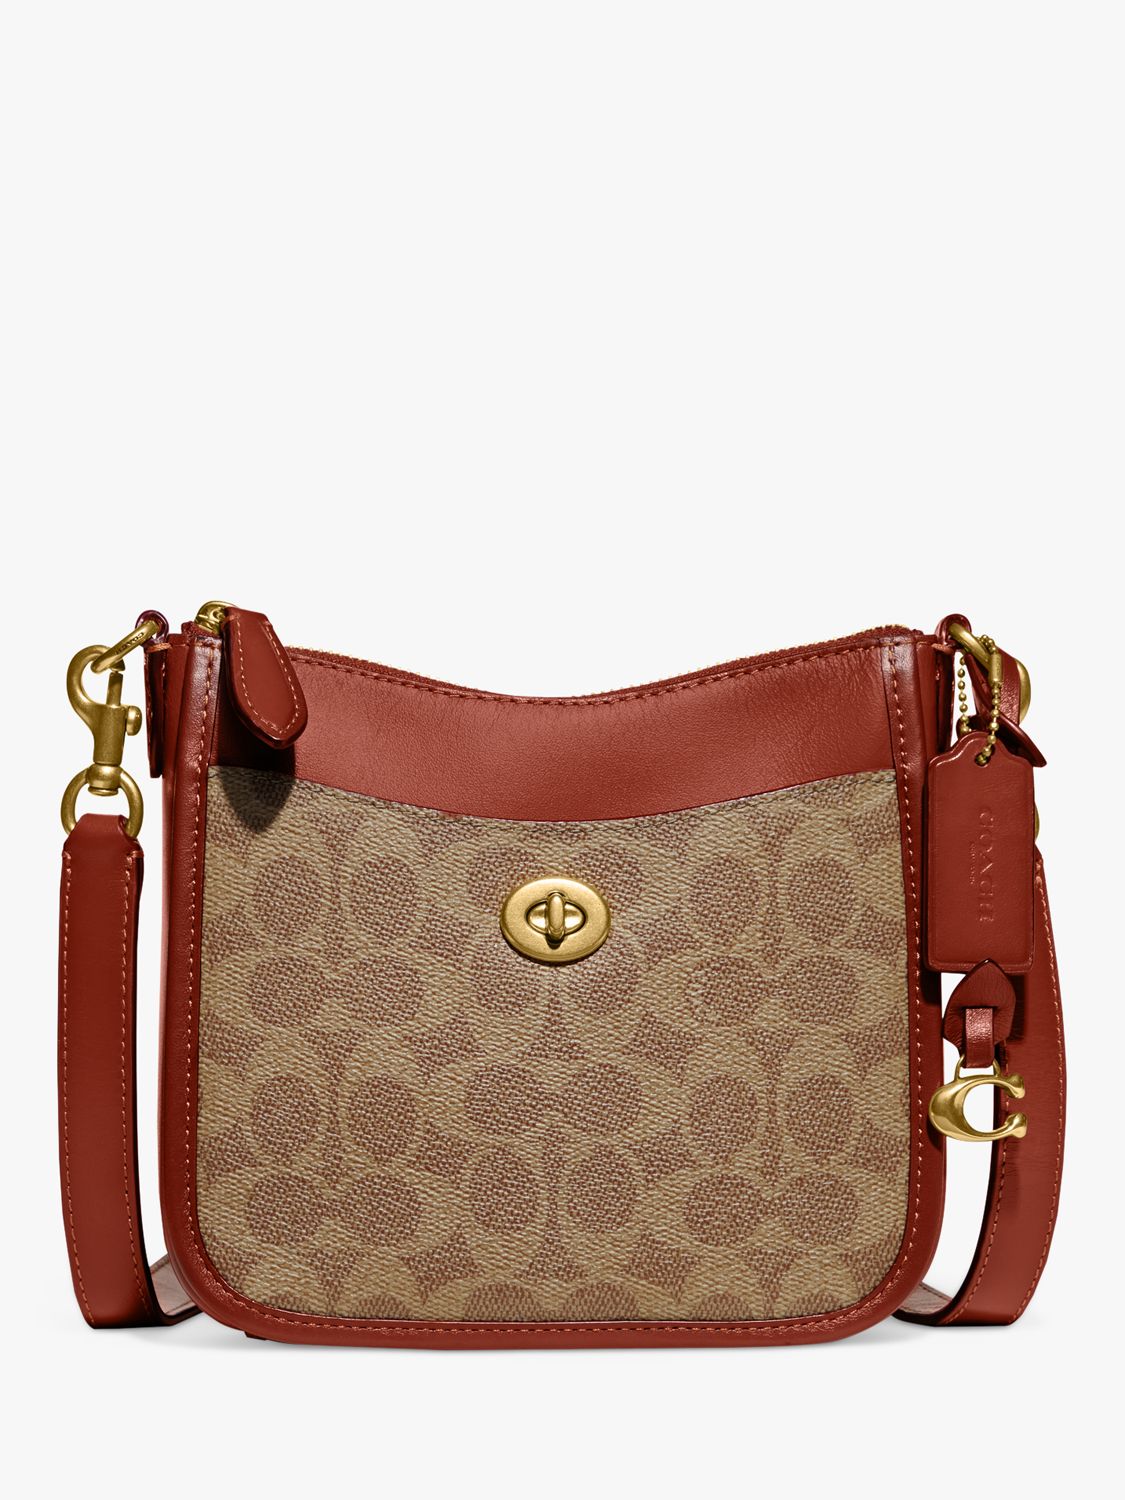 Coach Chaise 19 Signature Leather Canvas Cross Body Bag, Tan Rust at John  Lewis & Partners